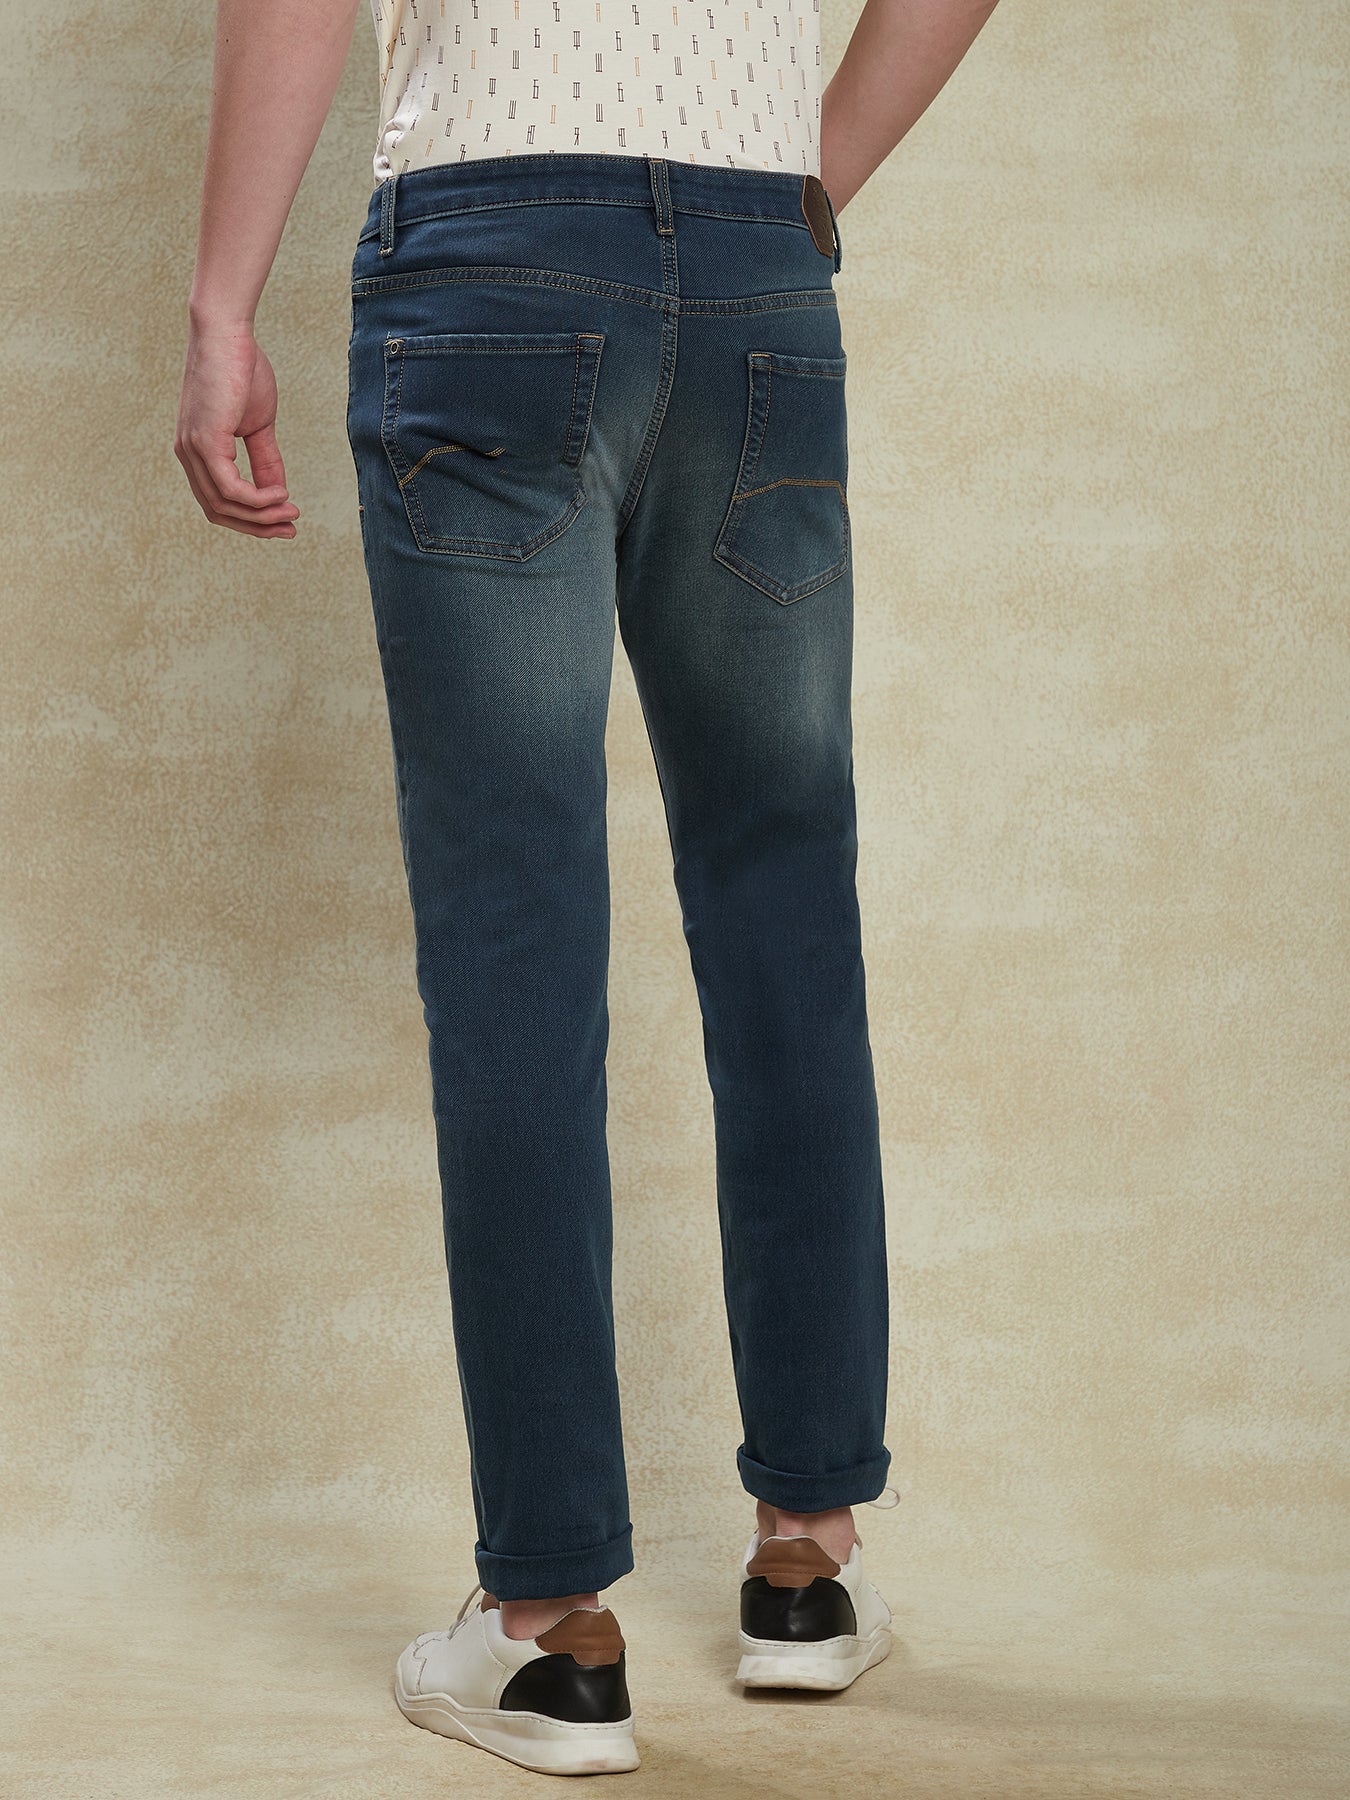 Cotton Stretch Dark Blue Plain Narrow Fit Flat Front Casual Jeans